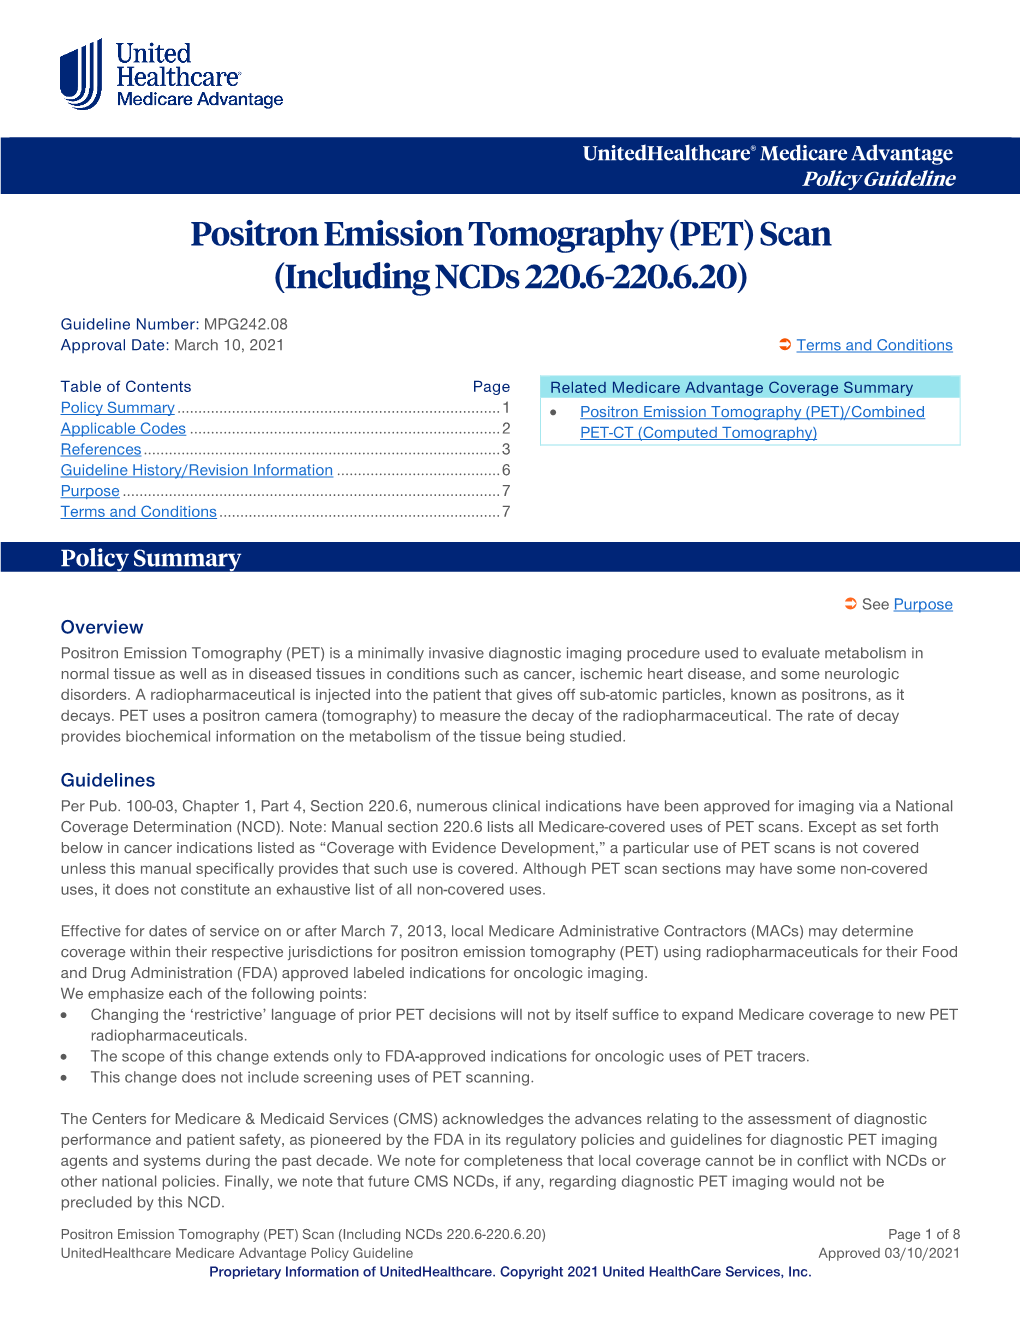 Positron Emission Tomography (PET) Scan (Including Ncds 220.6-220.6.20) – Medicare Advantage Policy Guideline